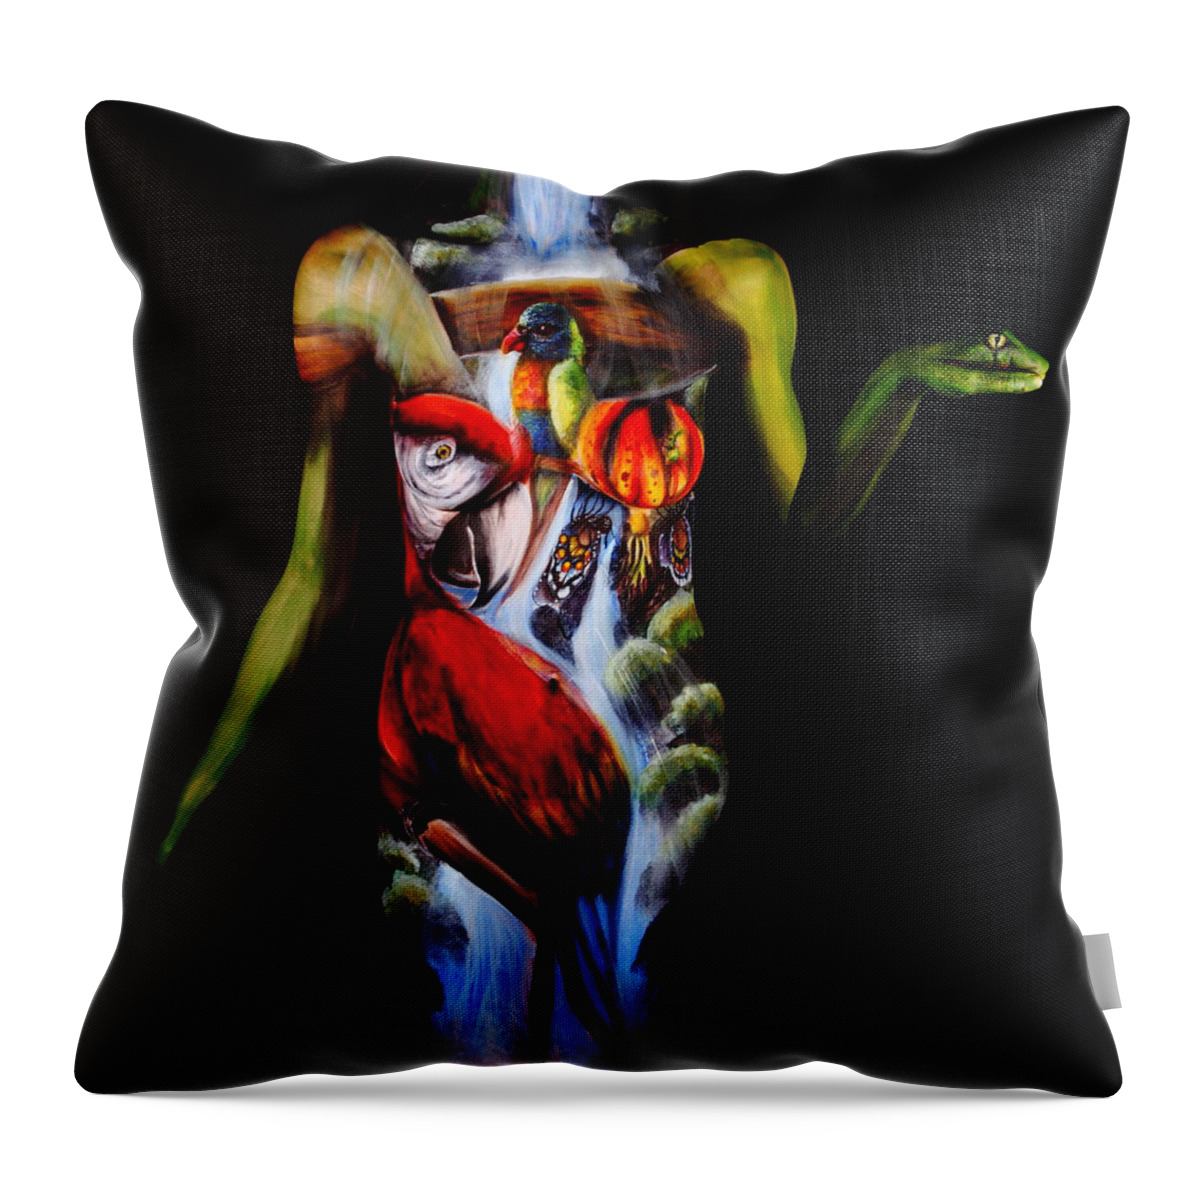 Fine Art Body Paint Throw Pillow featuring the photograph Getaway by Angela Rene Roberts and Cully Firmin